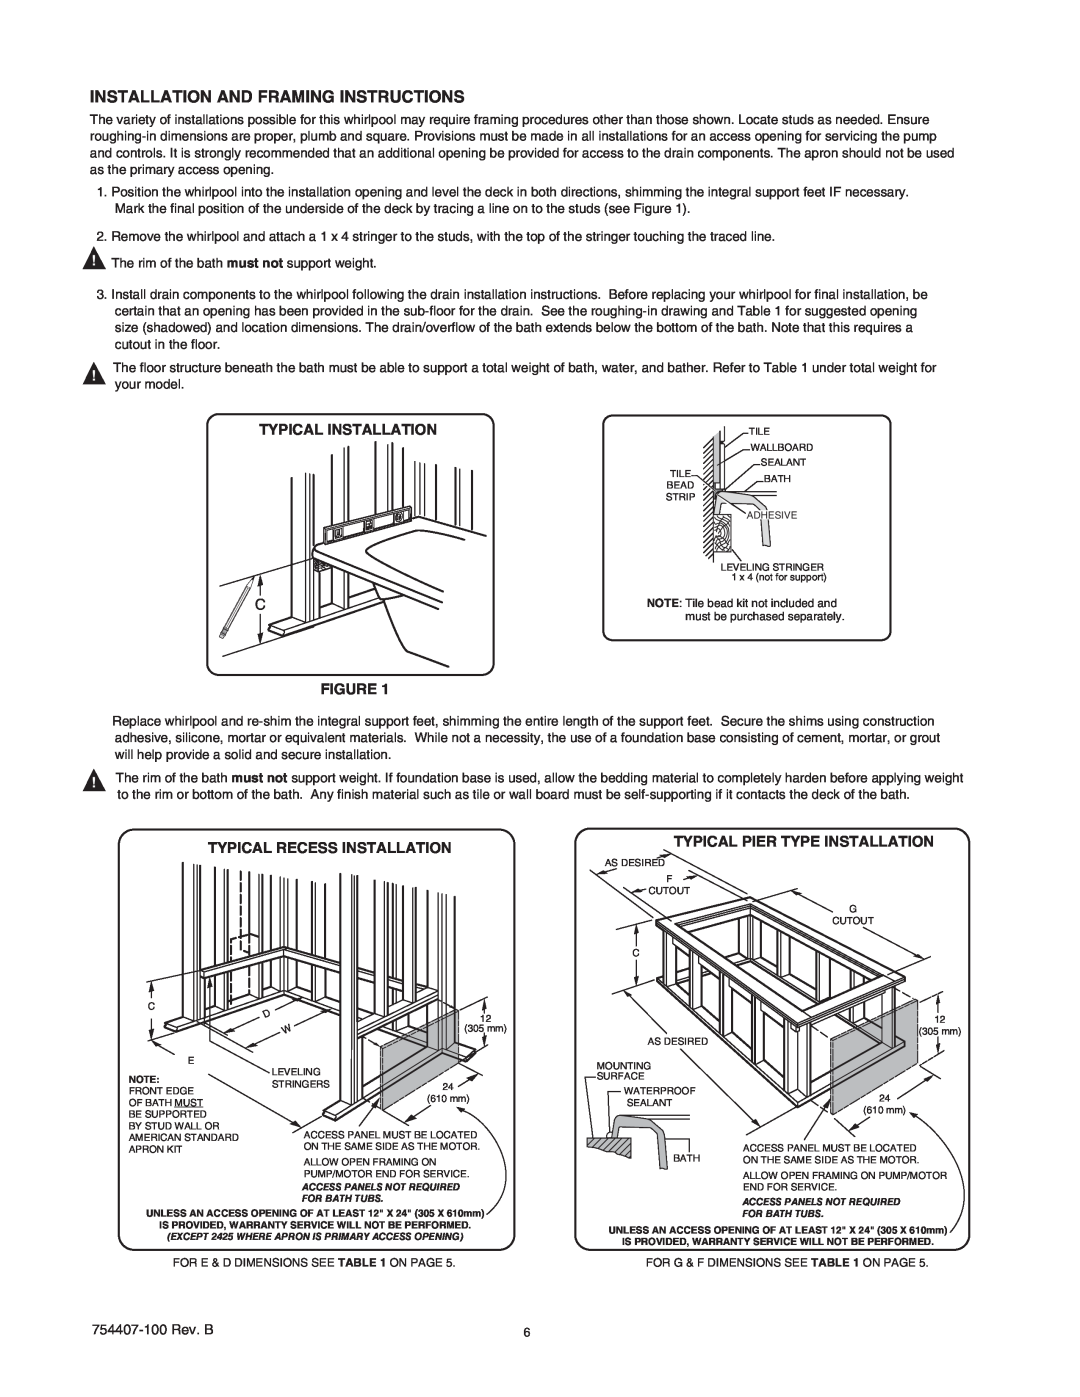 American Standard 2466, 2383, 2371 Installation And Framing Instructions, Typical Installation, Typical Recess Installation 